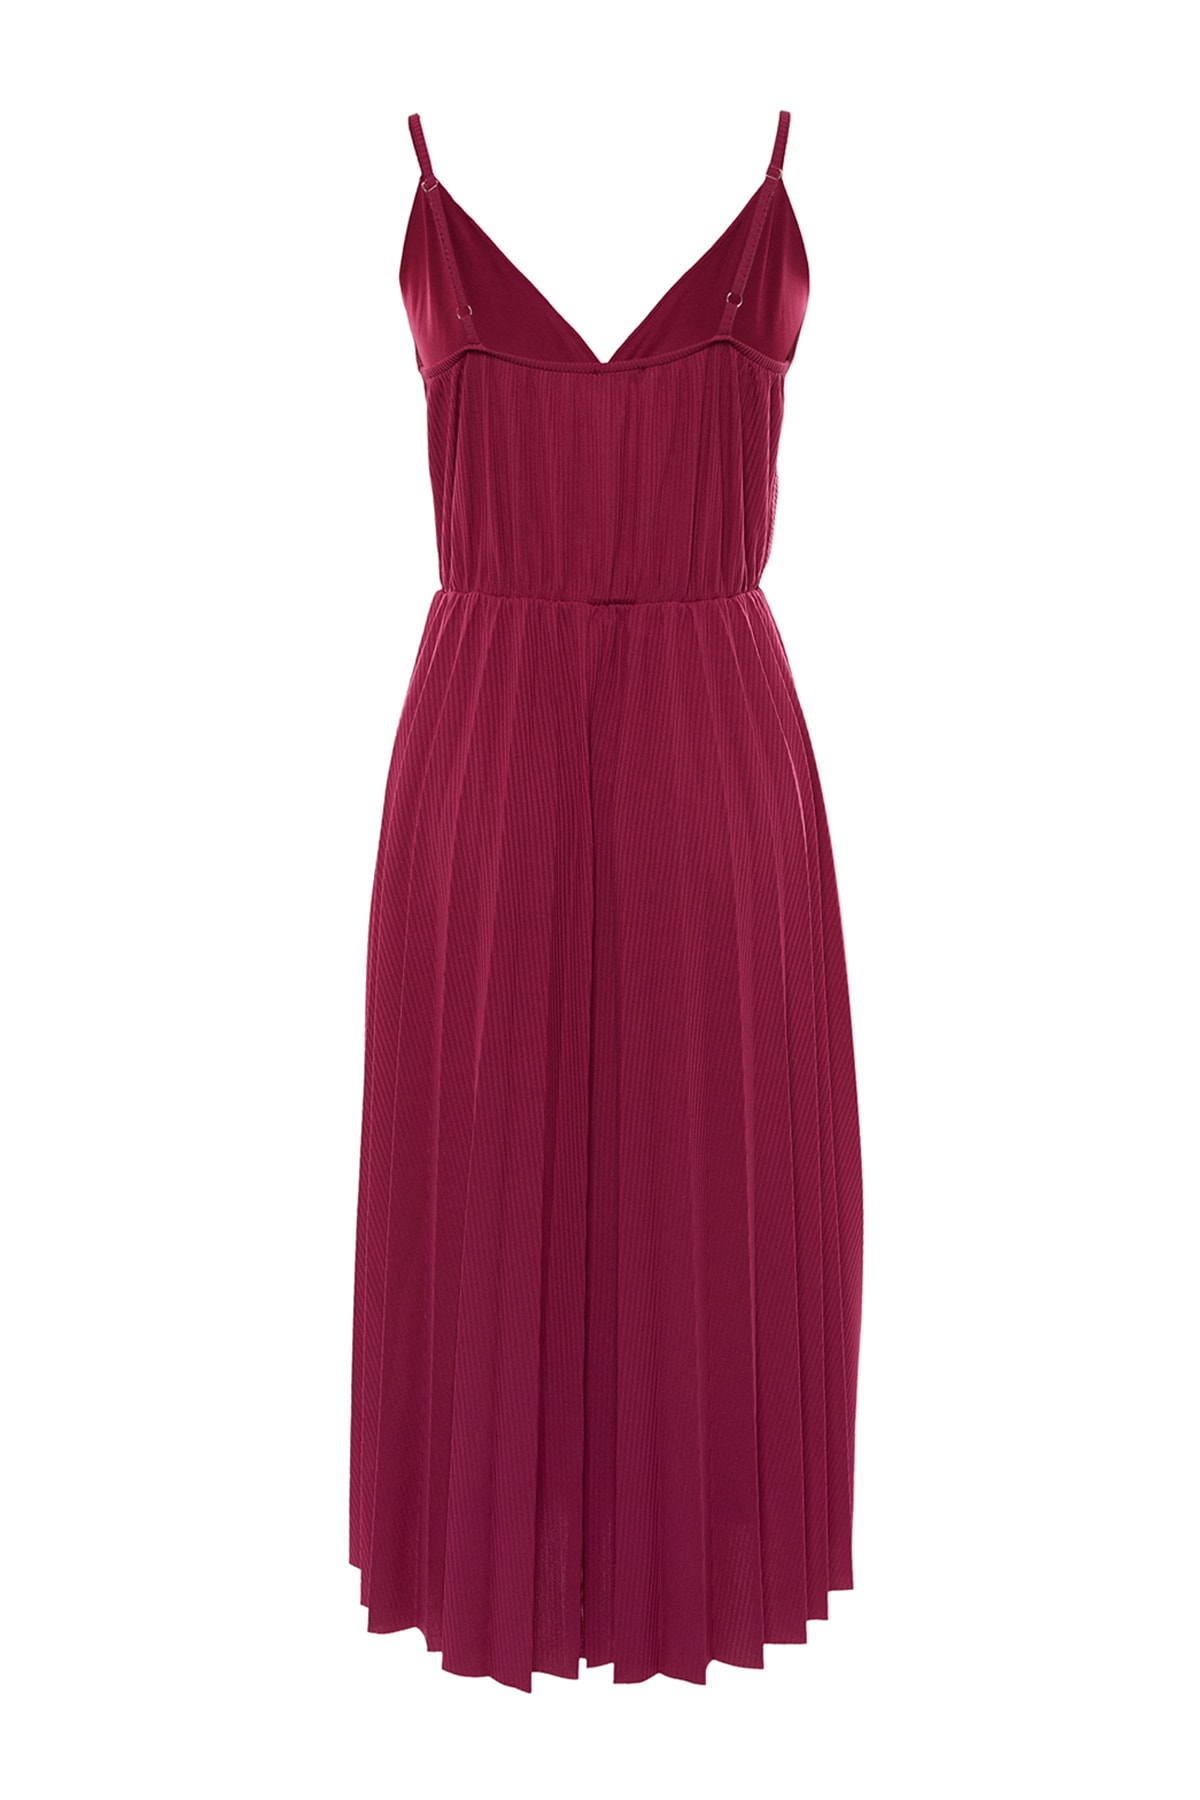 Trendyol Curve Fuchsia Double Breasted Collar Knitted Strap Dress